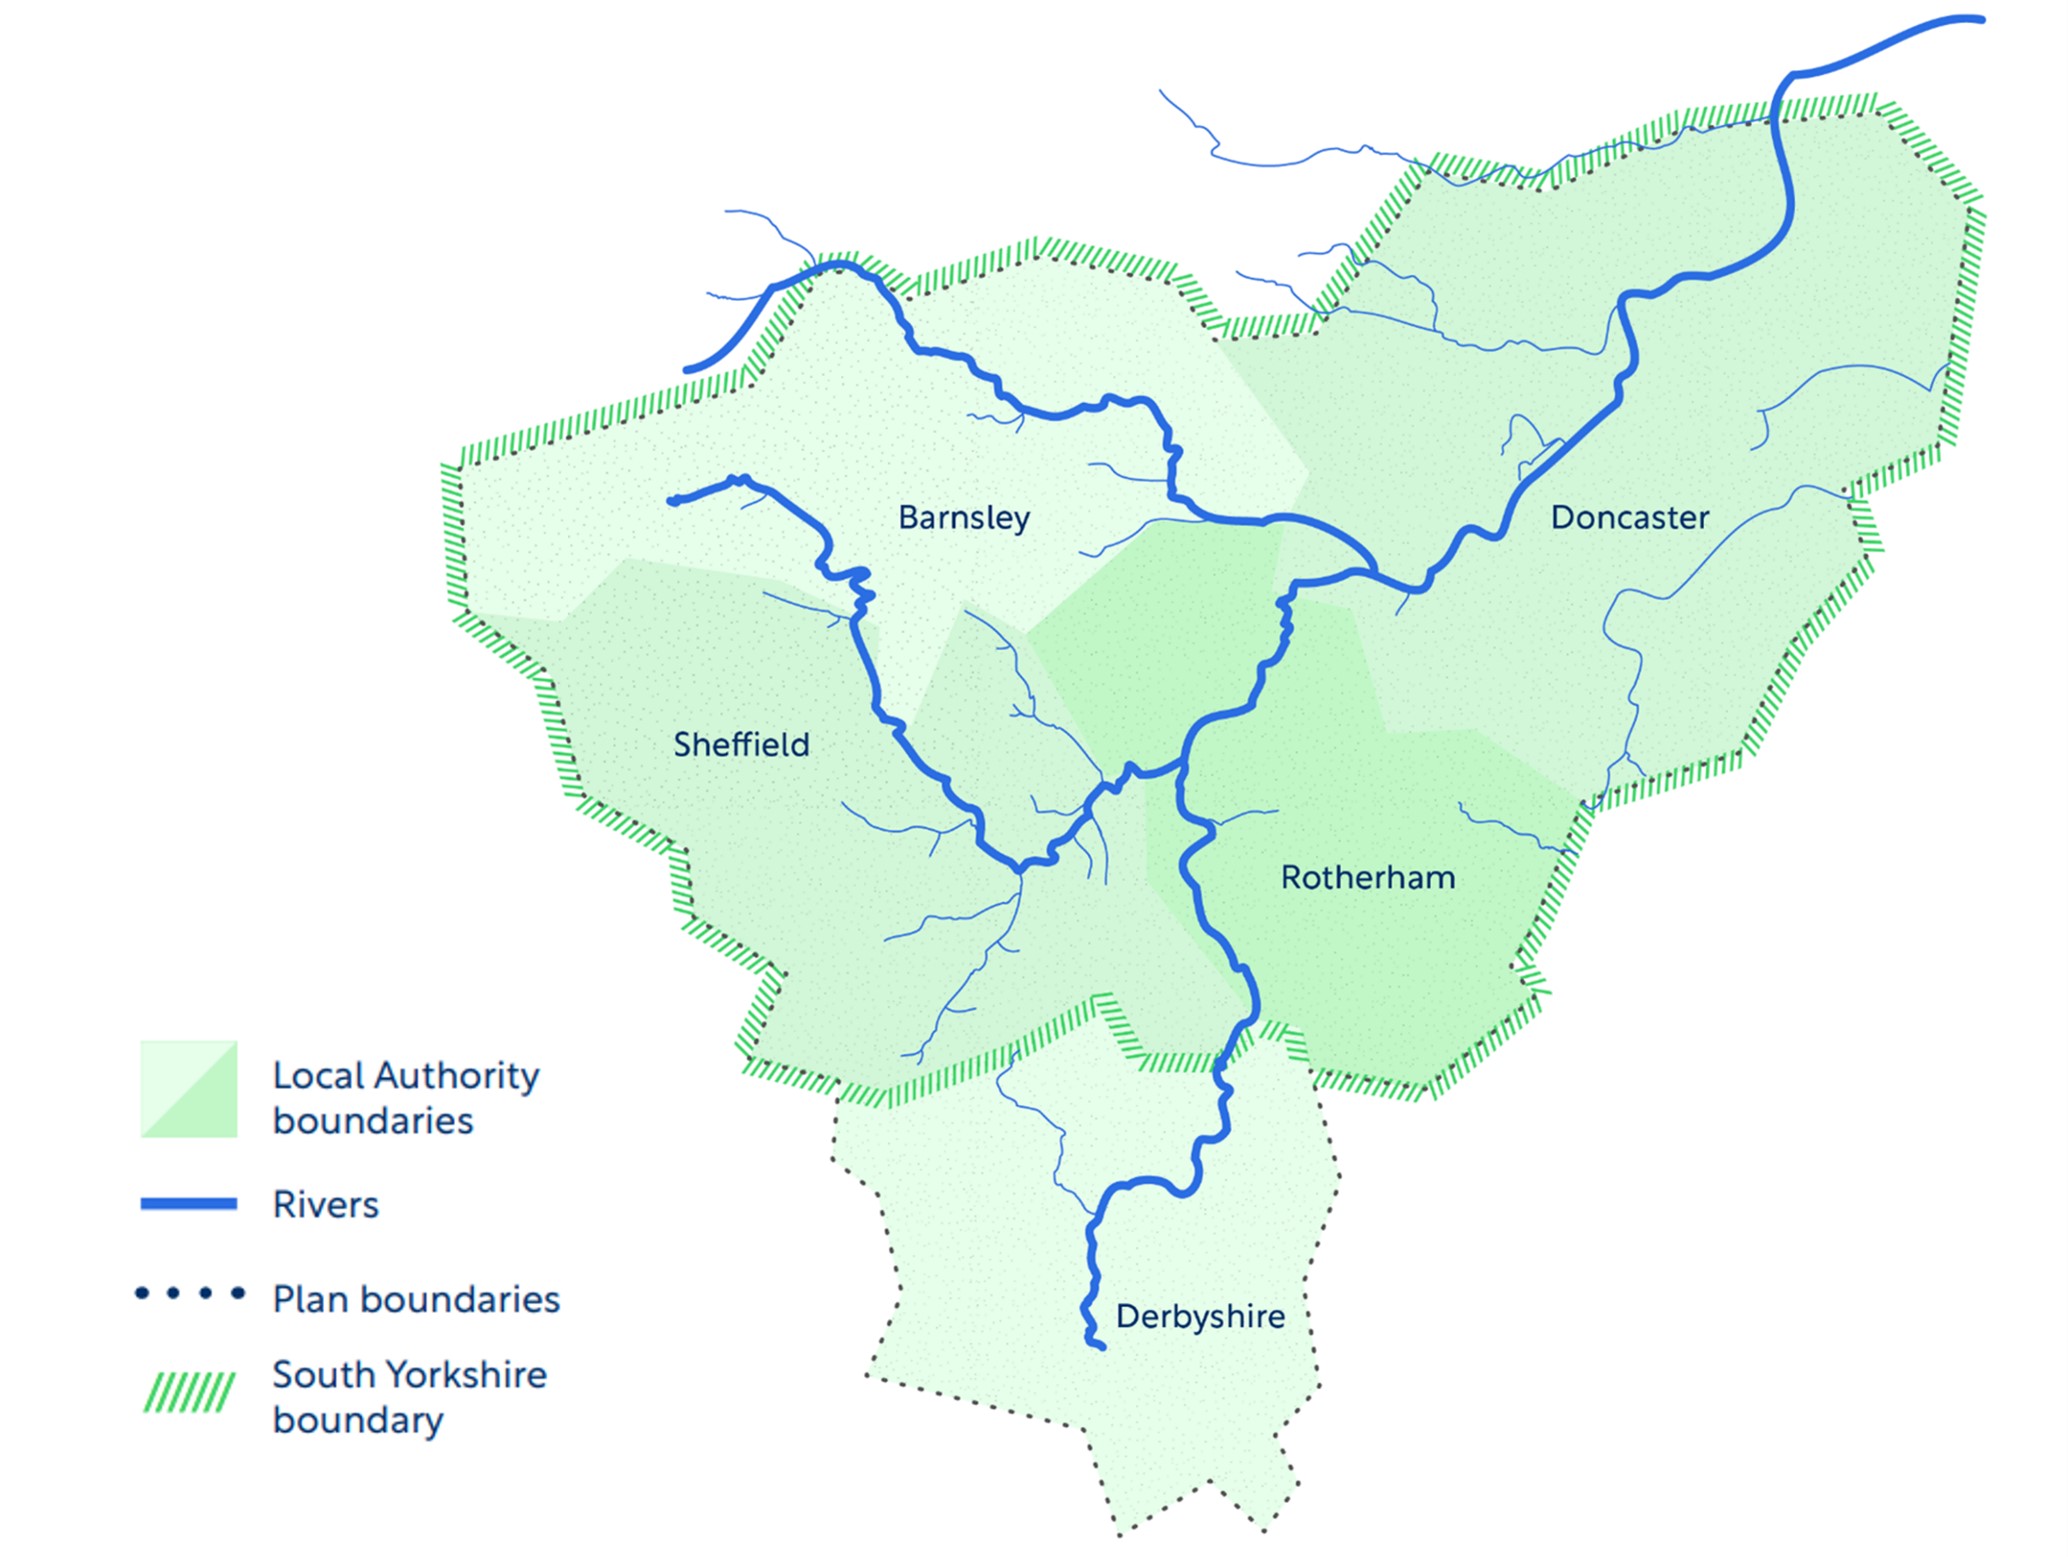 A simple map of South Yorkshire showing the route of the River Don and our local authority areas. Source: Connected by Water